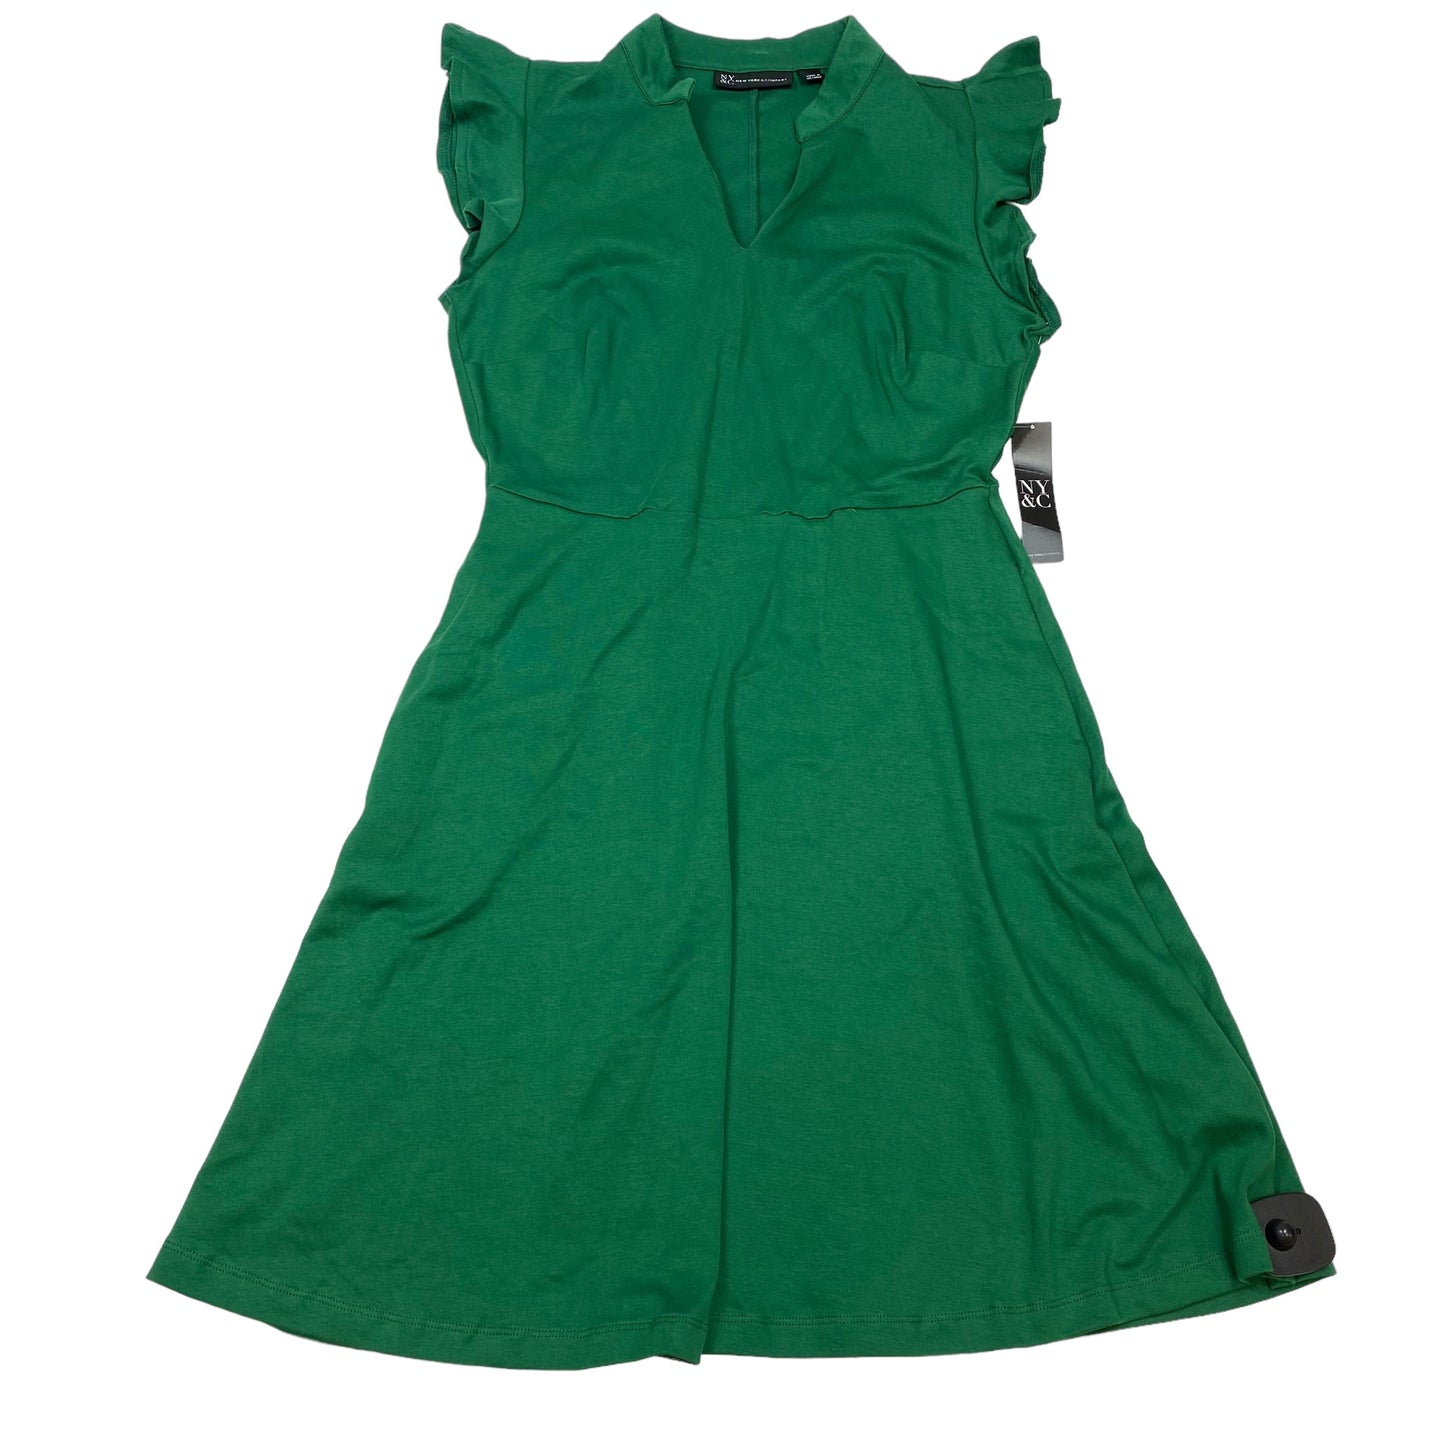 Green Dress Casual Short New York And Co, Size S